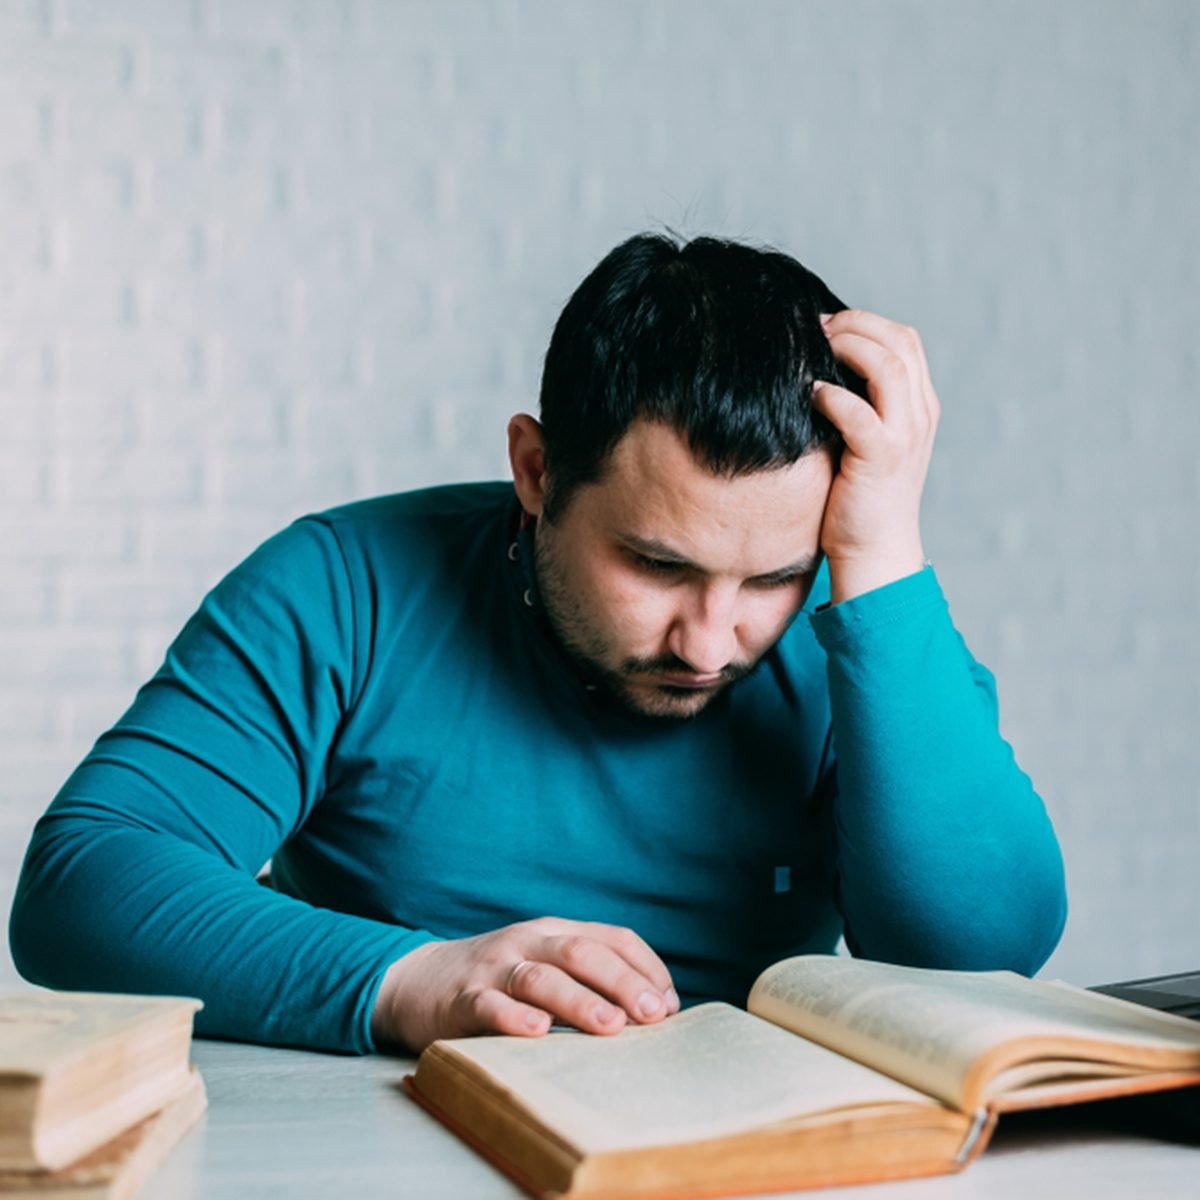 Man reading a book and nervous screams can't remember